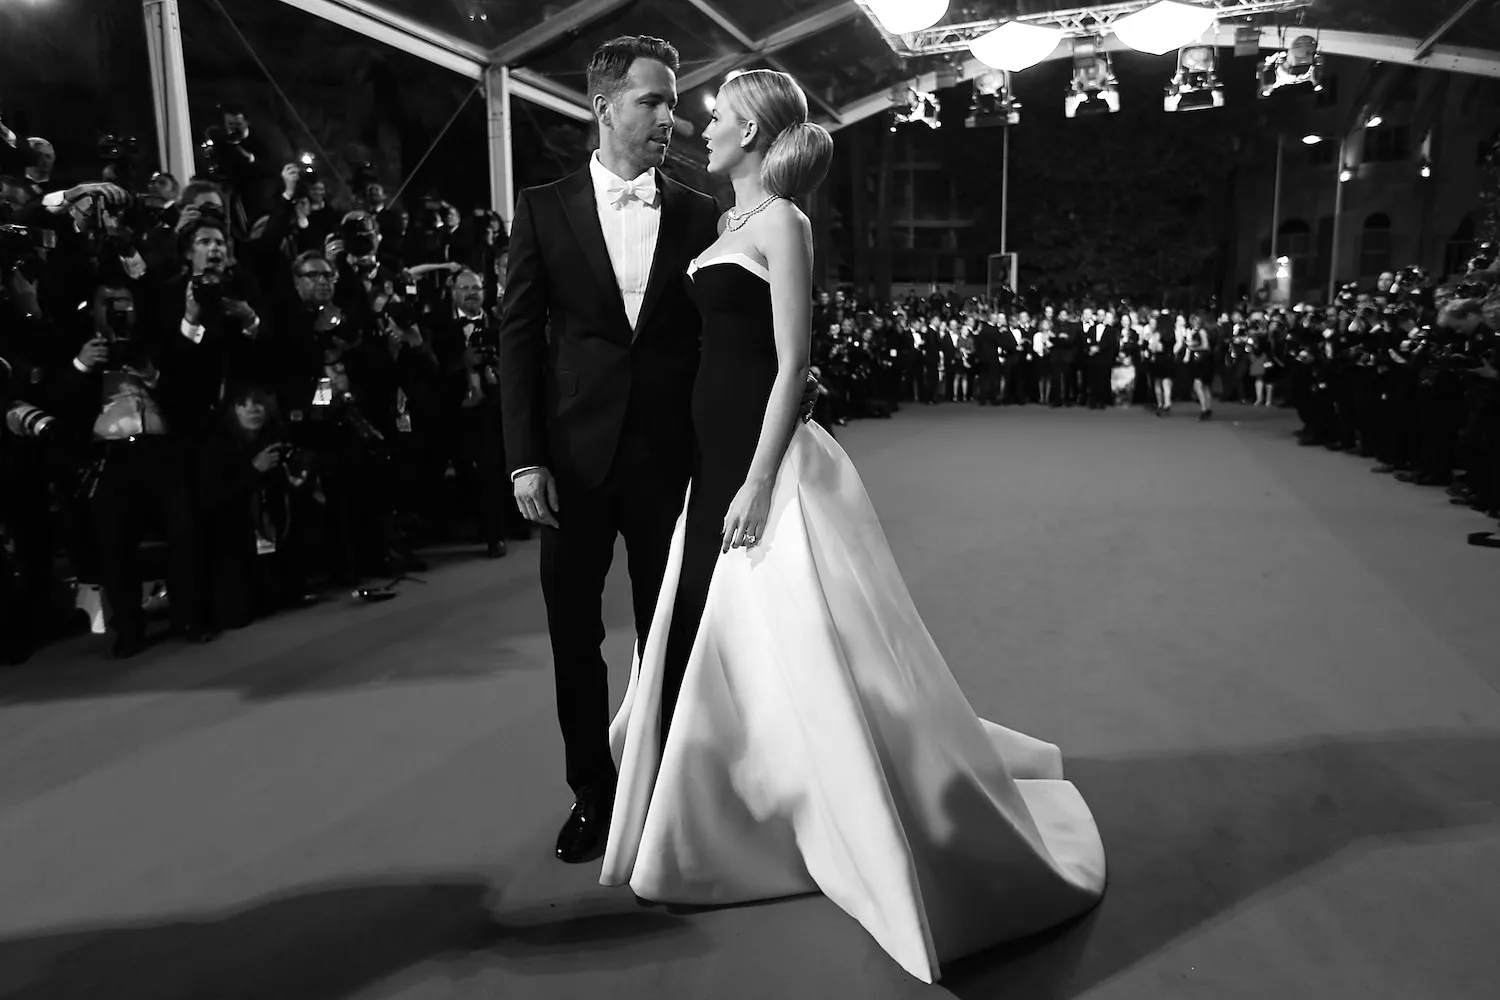 BLACK AND WHITE VERSION Canadian actor Ryan Reynolds and his wife US actress Blake Lively pose as they arrive for the screening of the film "Captives" at the 67th edition of the Cannes Film Festival in Cannes, southern France, on May 16, 2014.   AFP PHOTO / VALERY HACHE        (Photo credit should read VALERY HACHE/AFP/Getty Images)